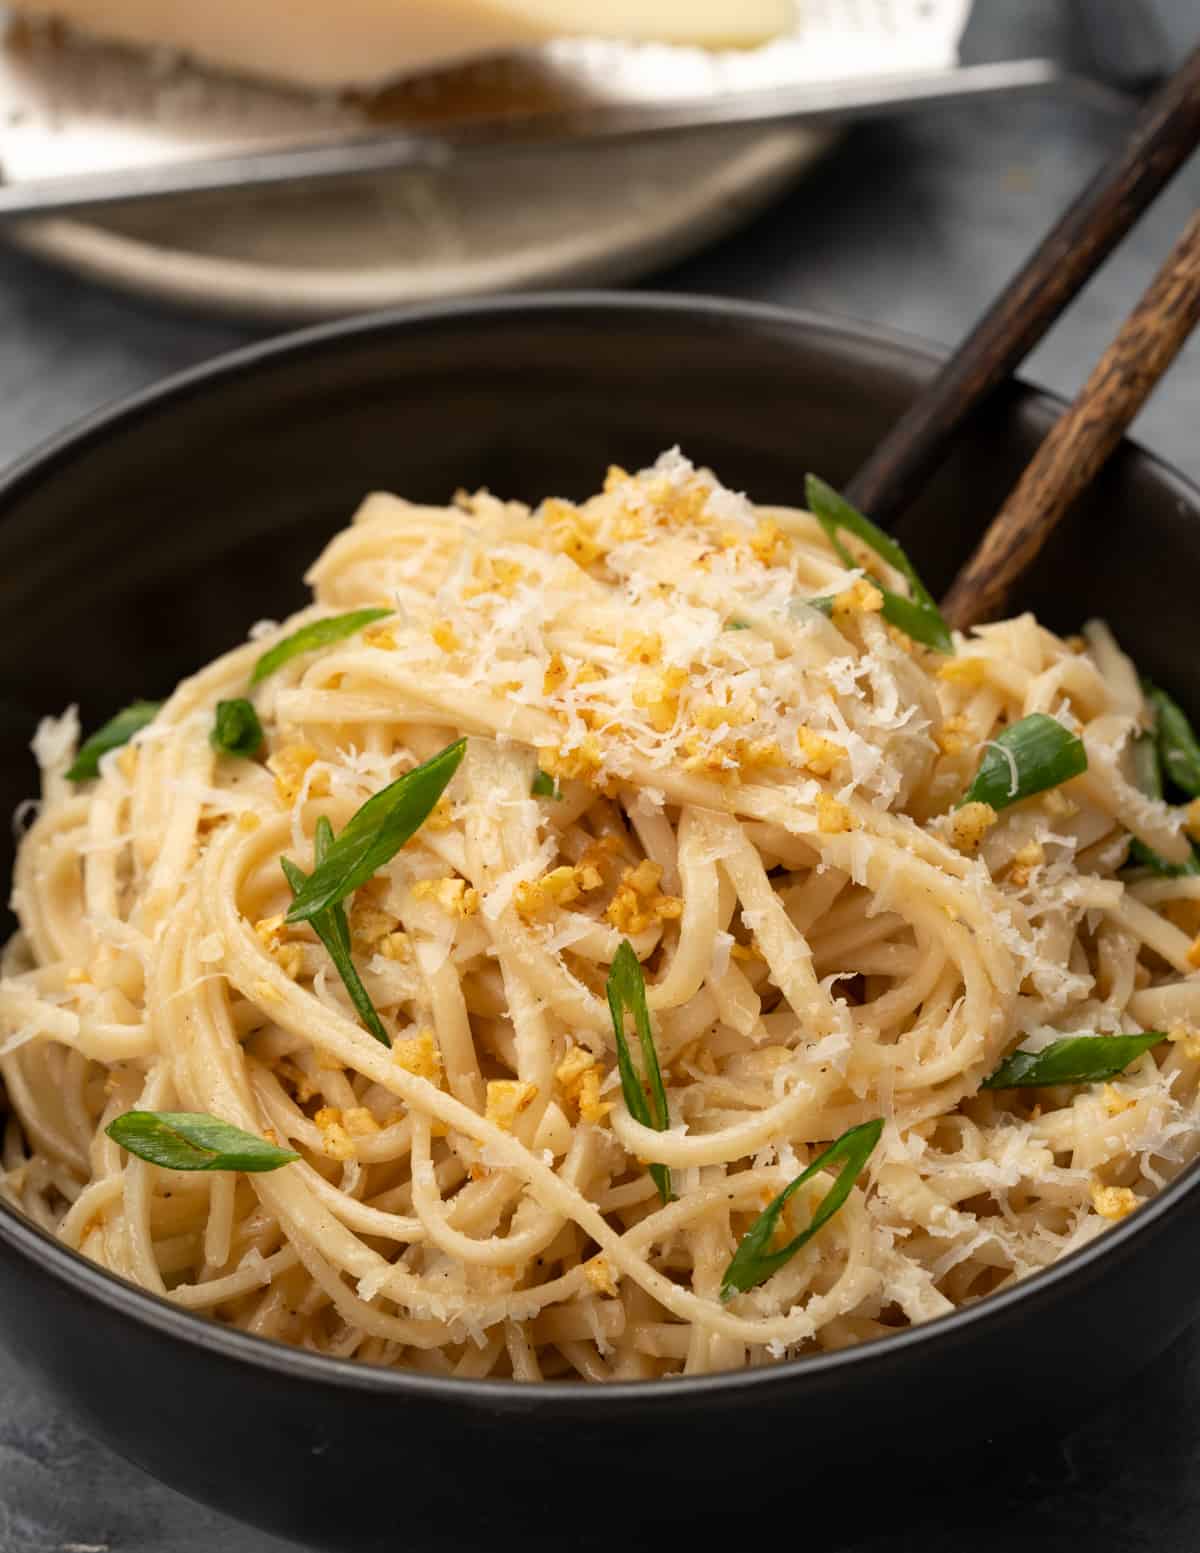 Bowl of buttery garlic noodles with grated parmesan cheese, sliced green onion and crispy garlic.